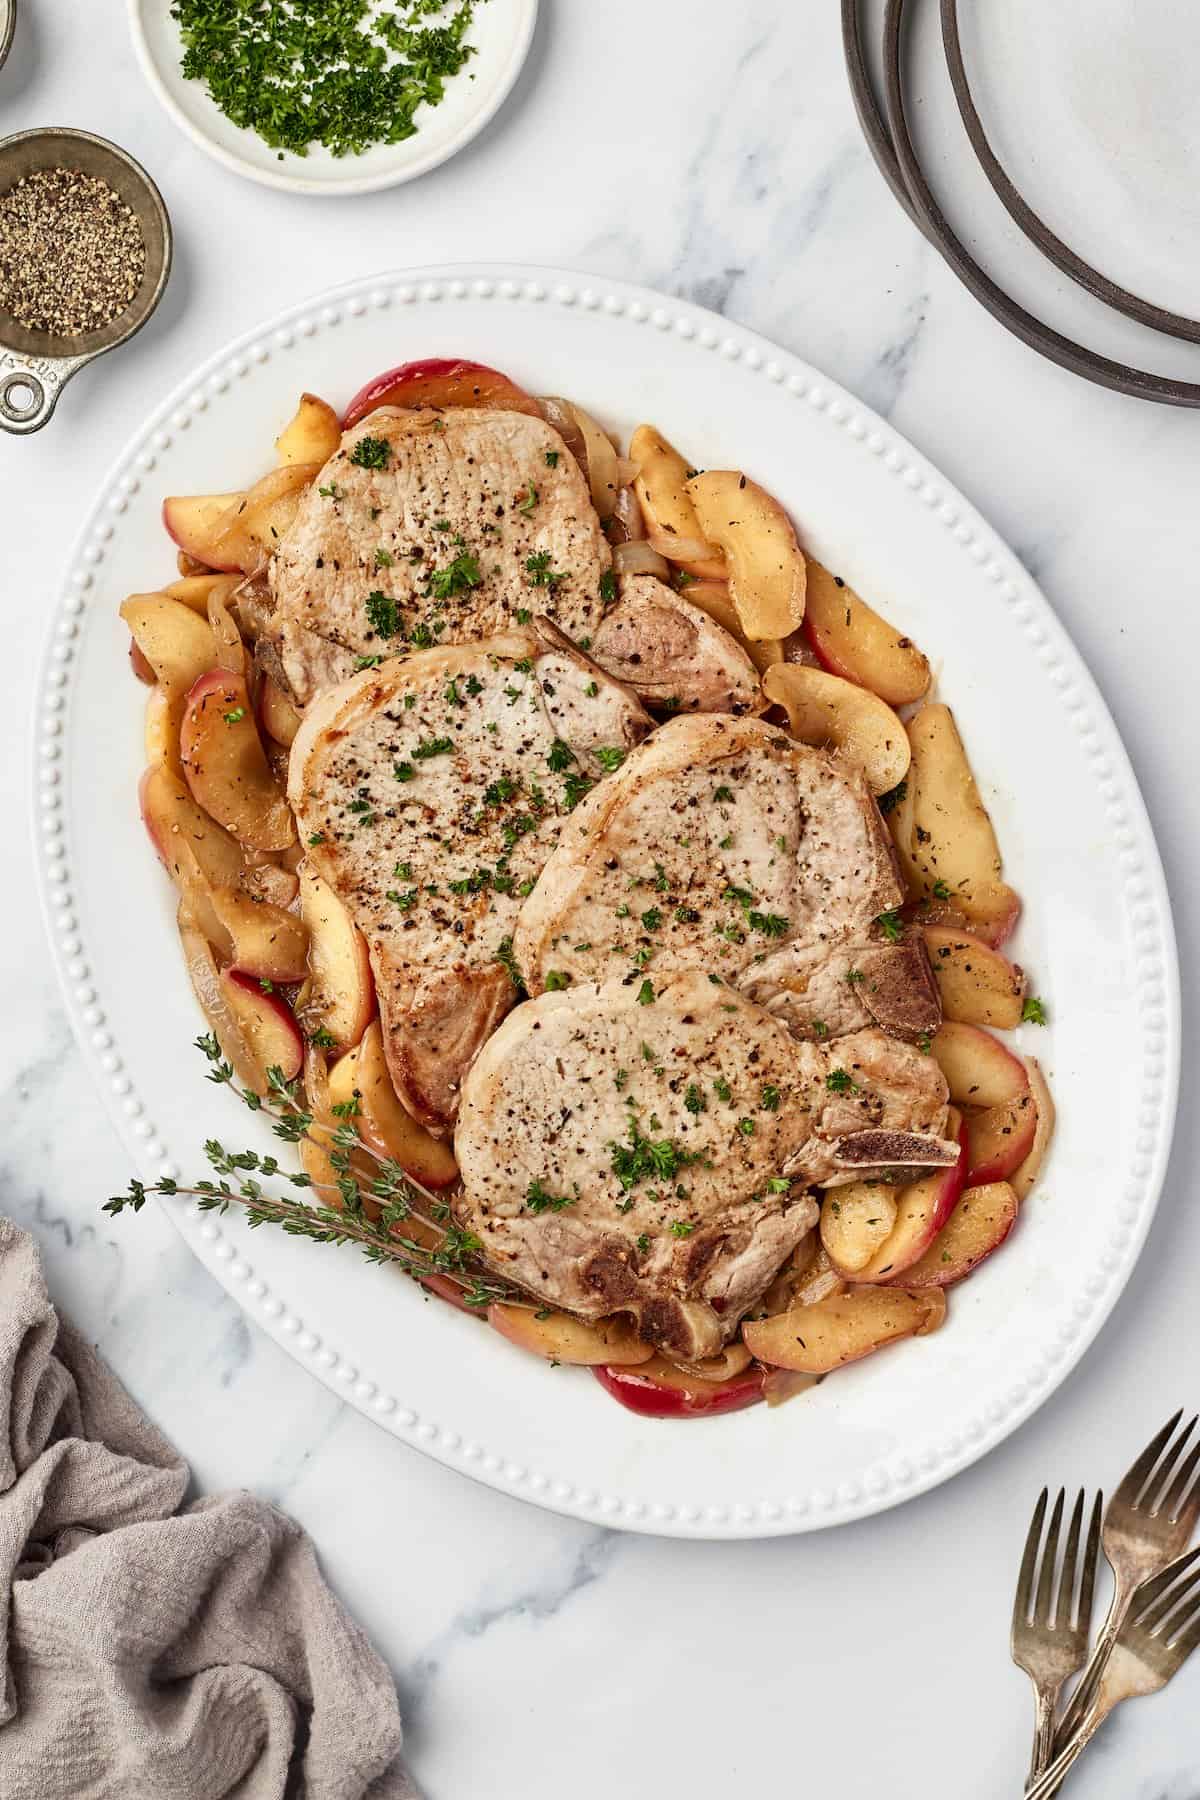 Overhead view of pork chops with apples and onions on serving platter